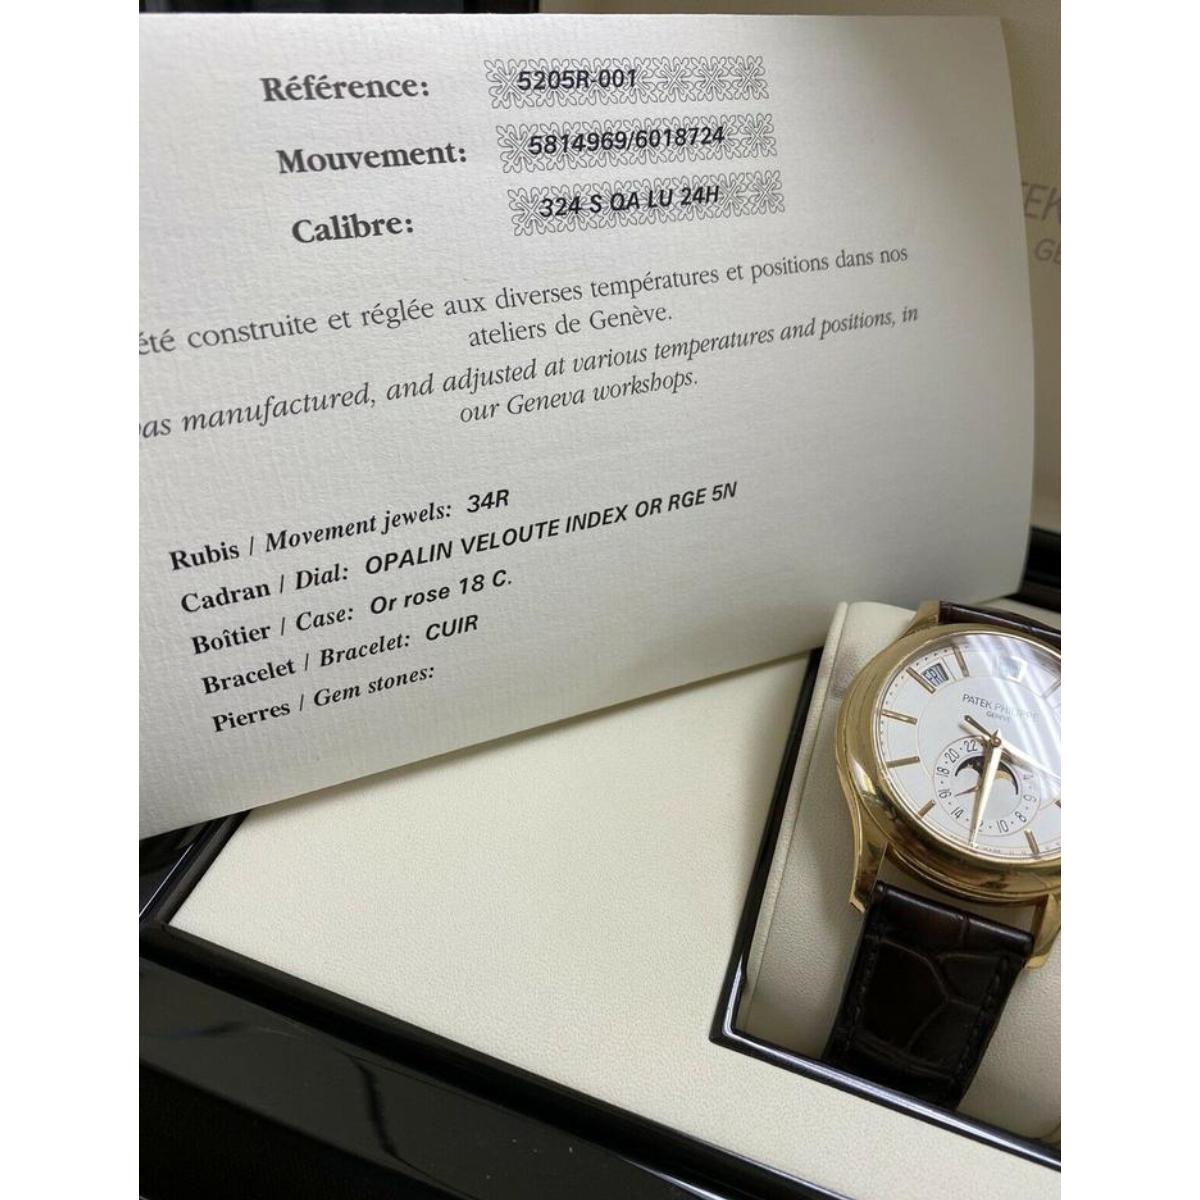 Brand - Patek Philippe
Reference - 5205R-001

This Patek includes both the original brown strap plus a brand new original Patek black strap. It also includes the inner and outer boxes, documents, papers, and push pin. It is as close to a full set as